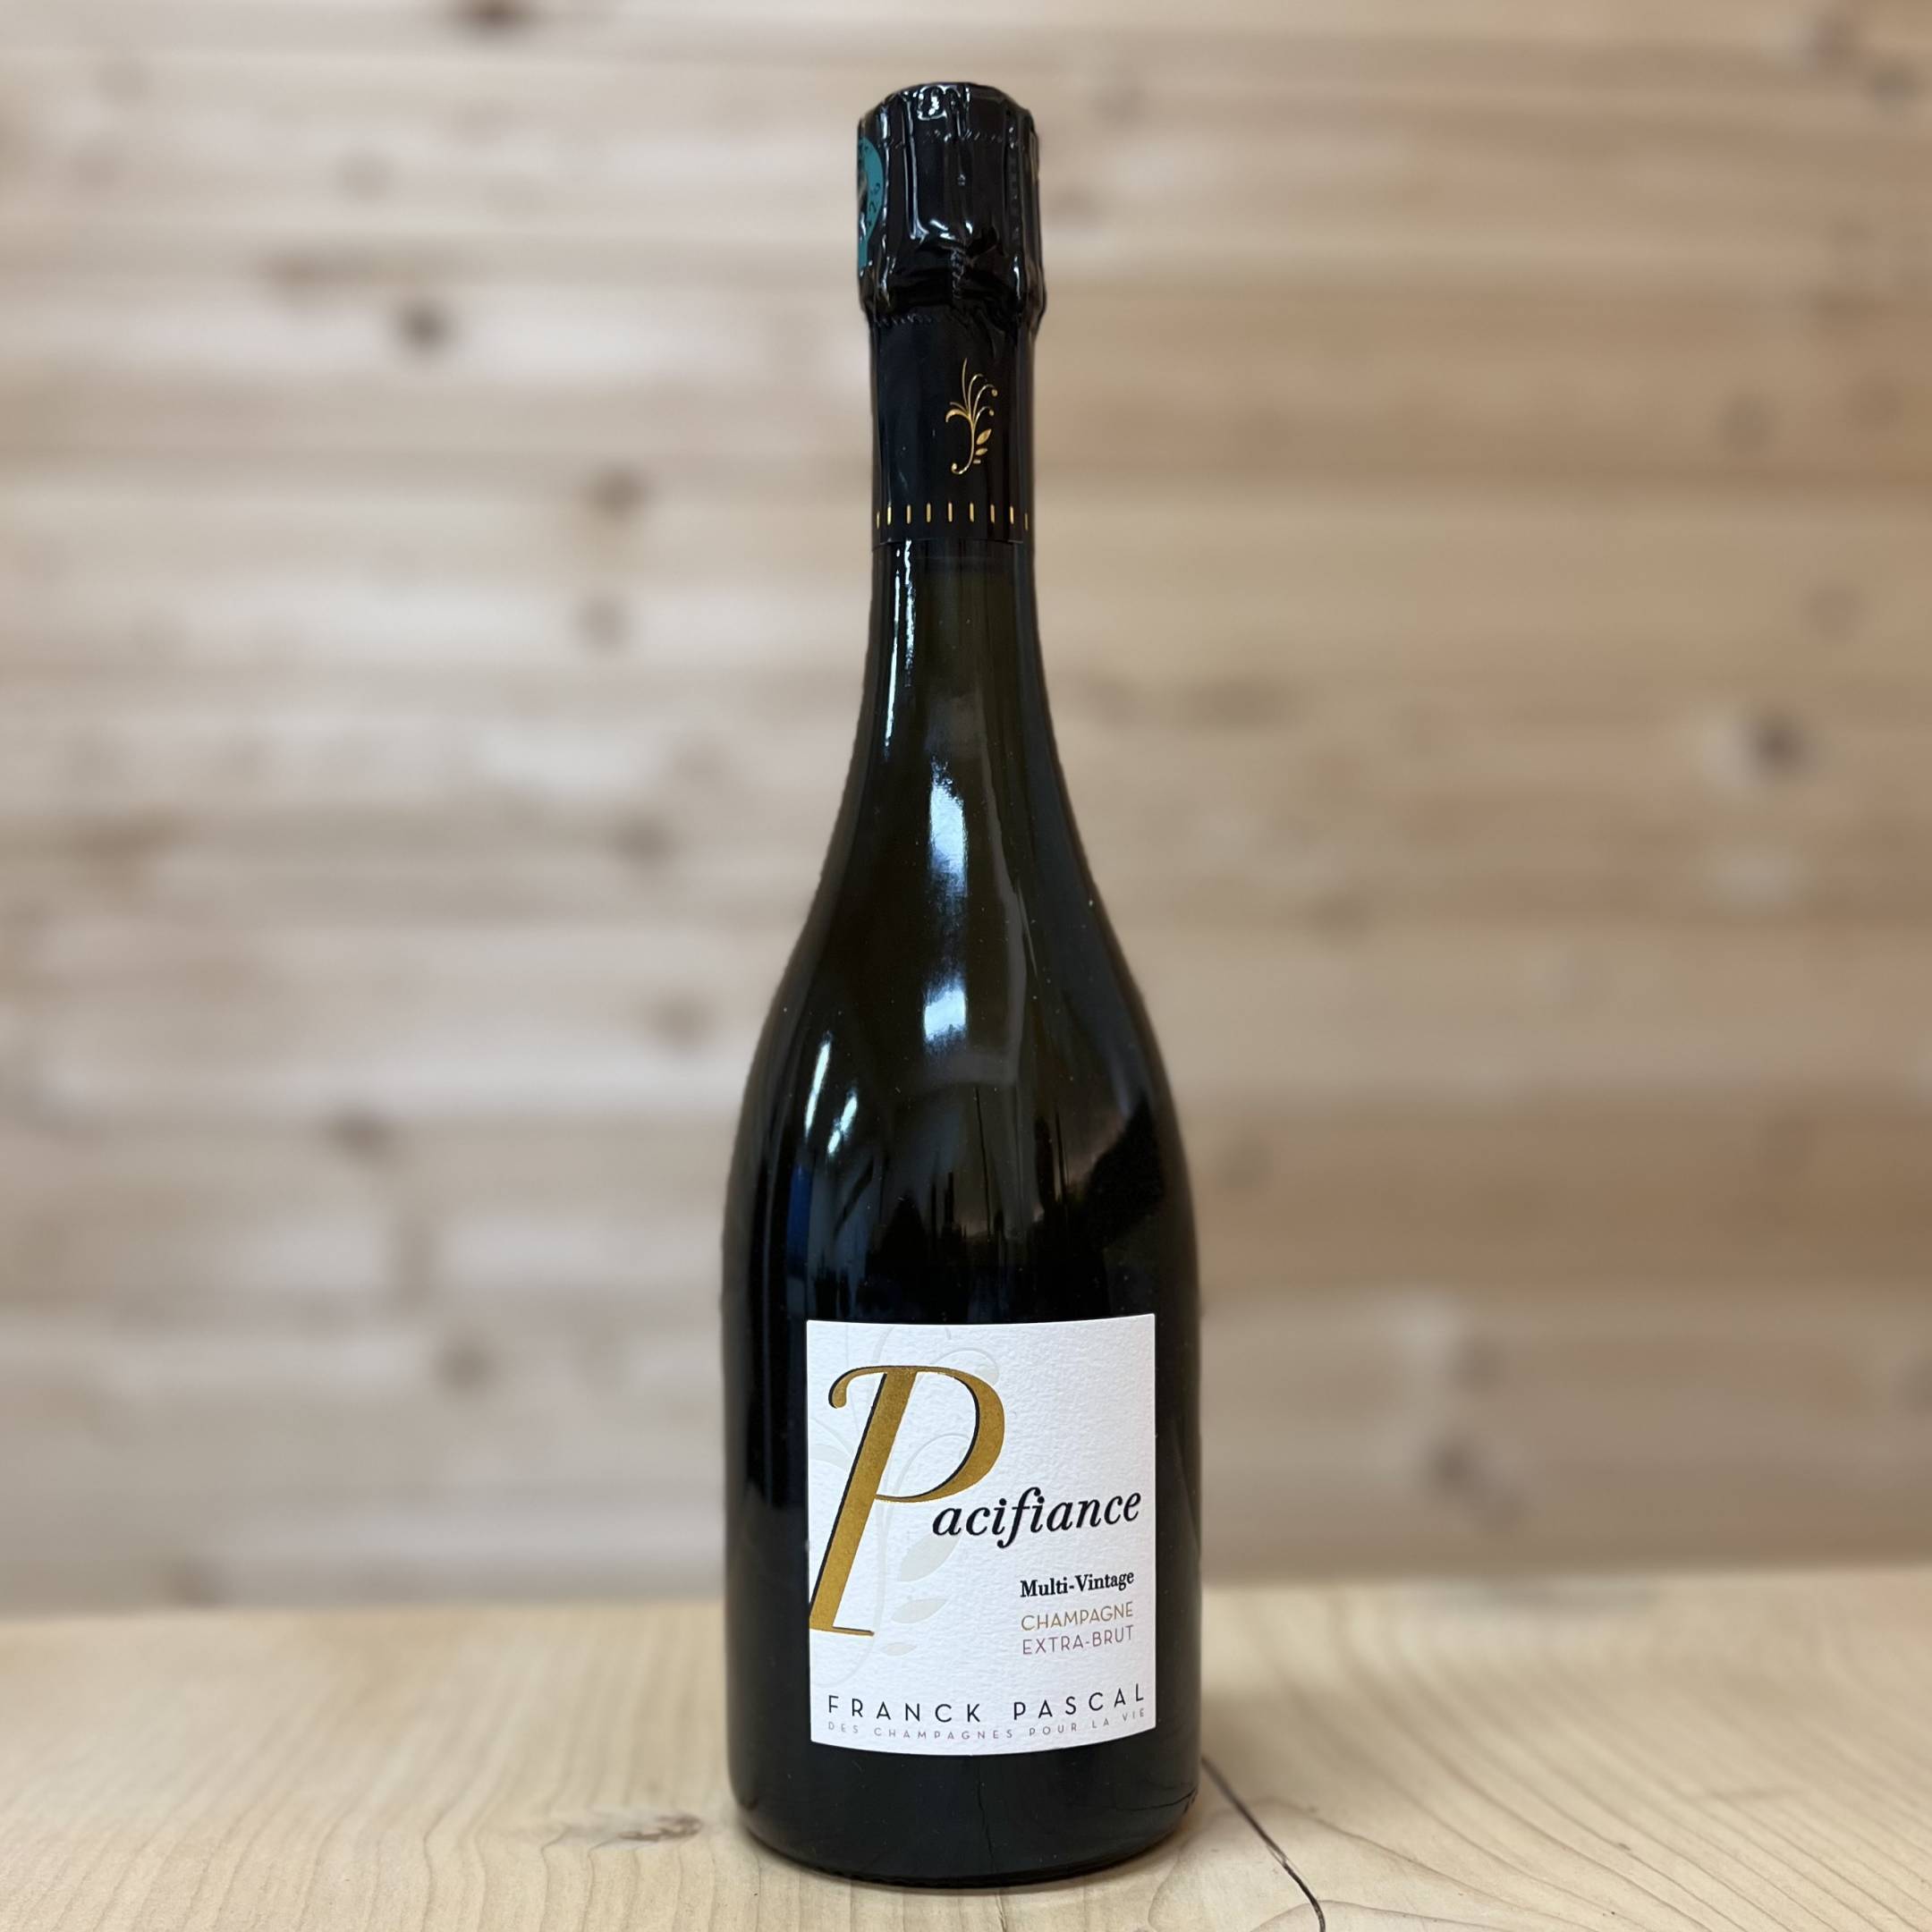 Franck Pascal Champagne “Pacifiance” Brut Nature